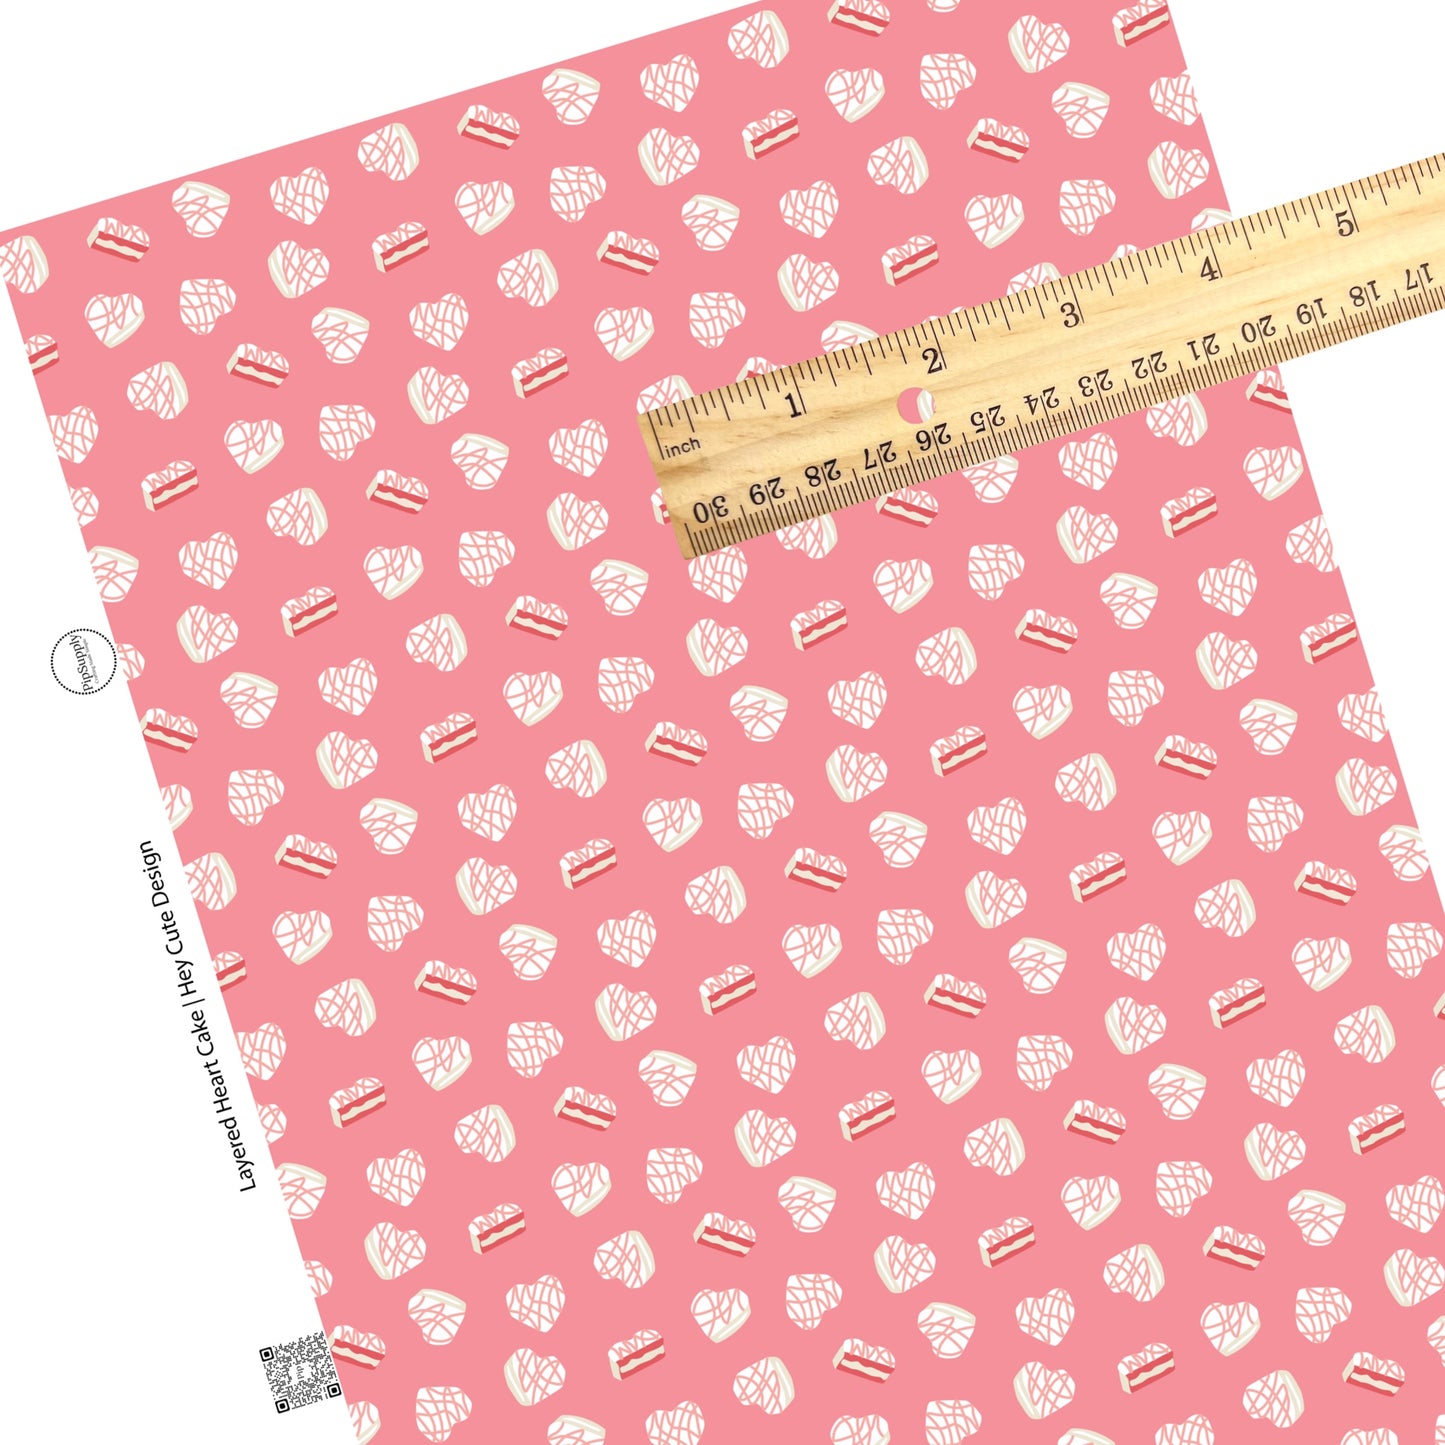 These Valentine's pattern themed faux leather sheets contain the following design elements: cream heart shaped cakes on pink. Our CPSIA compliant faux leather sheets or rolls can be used for all types of crafting projects.